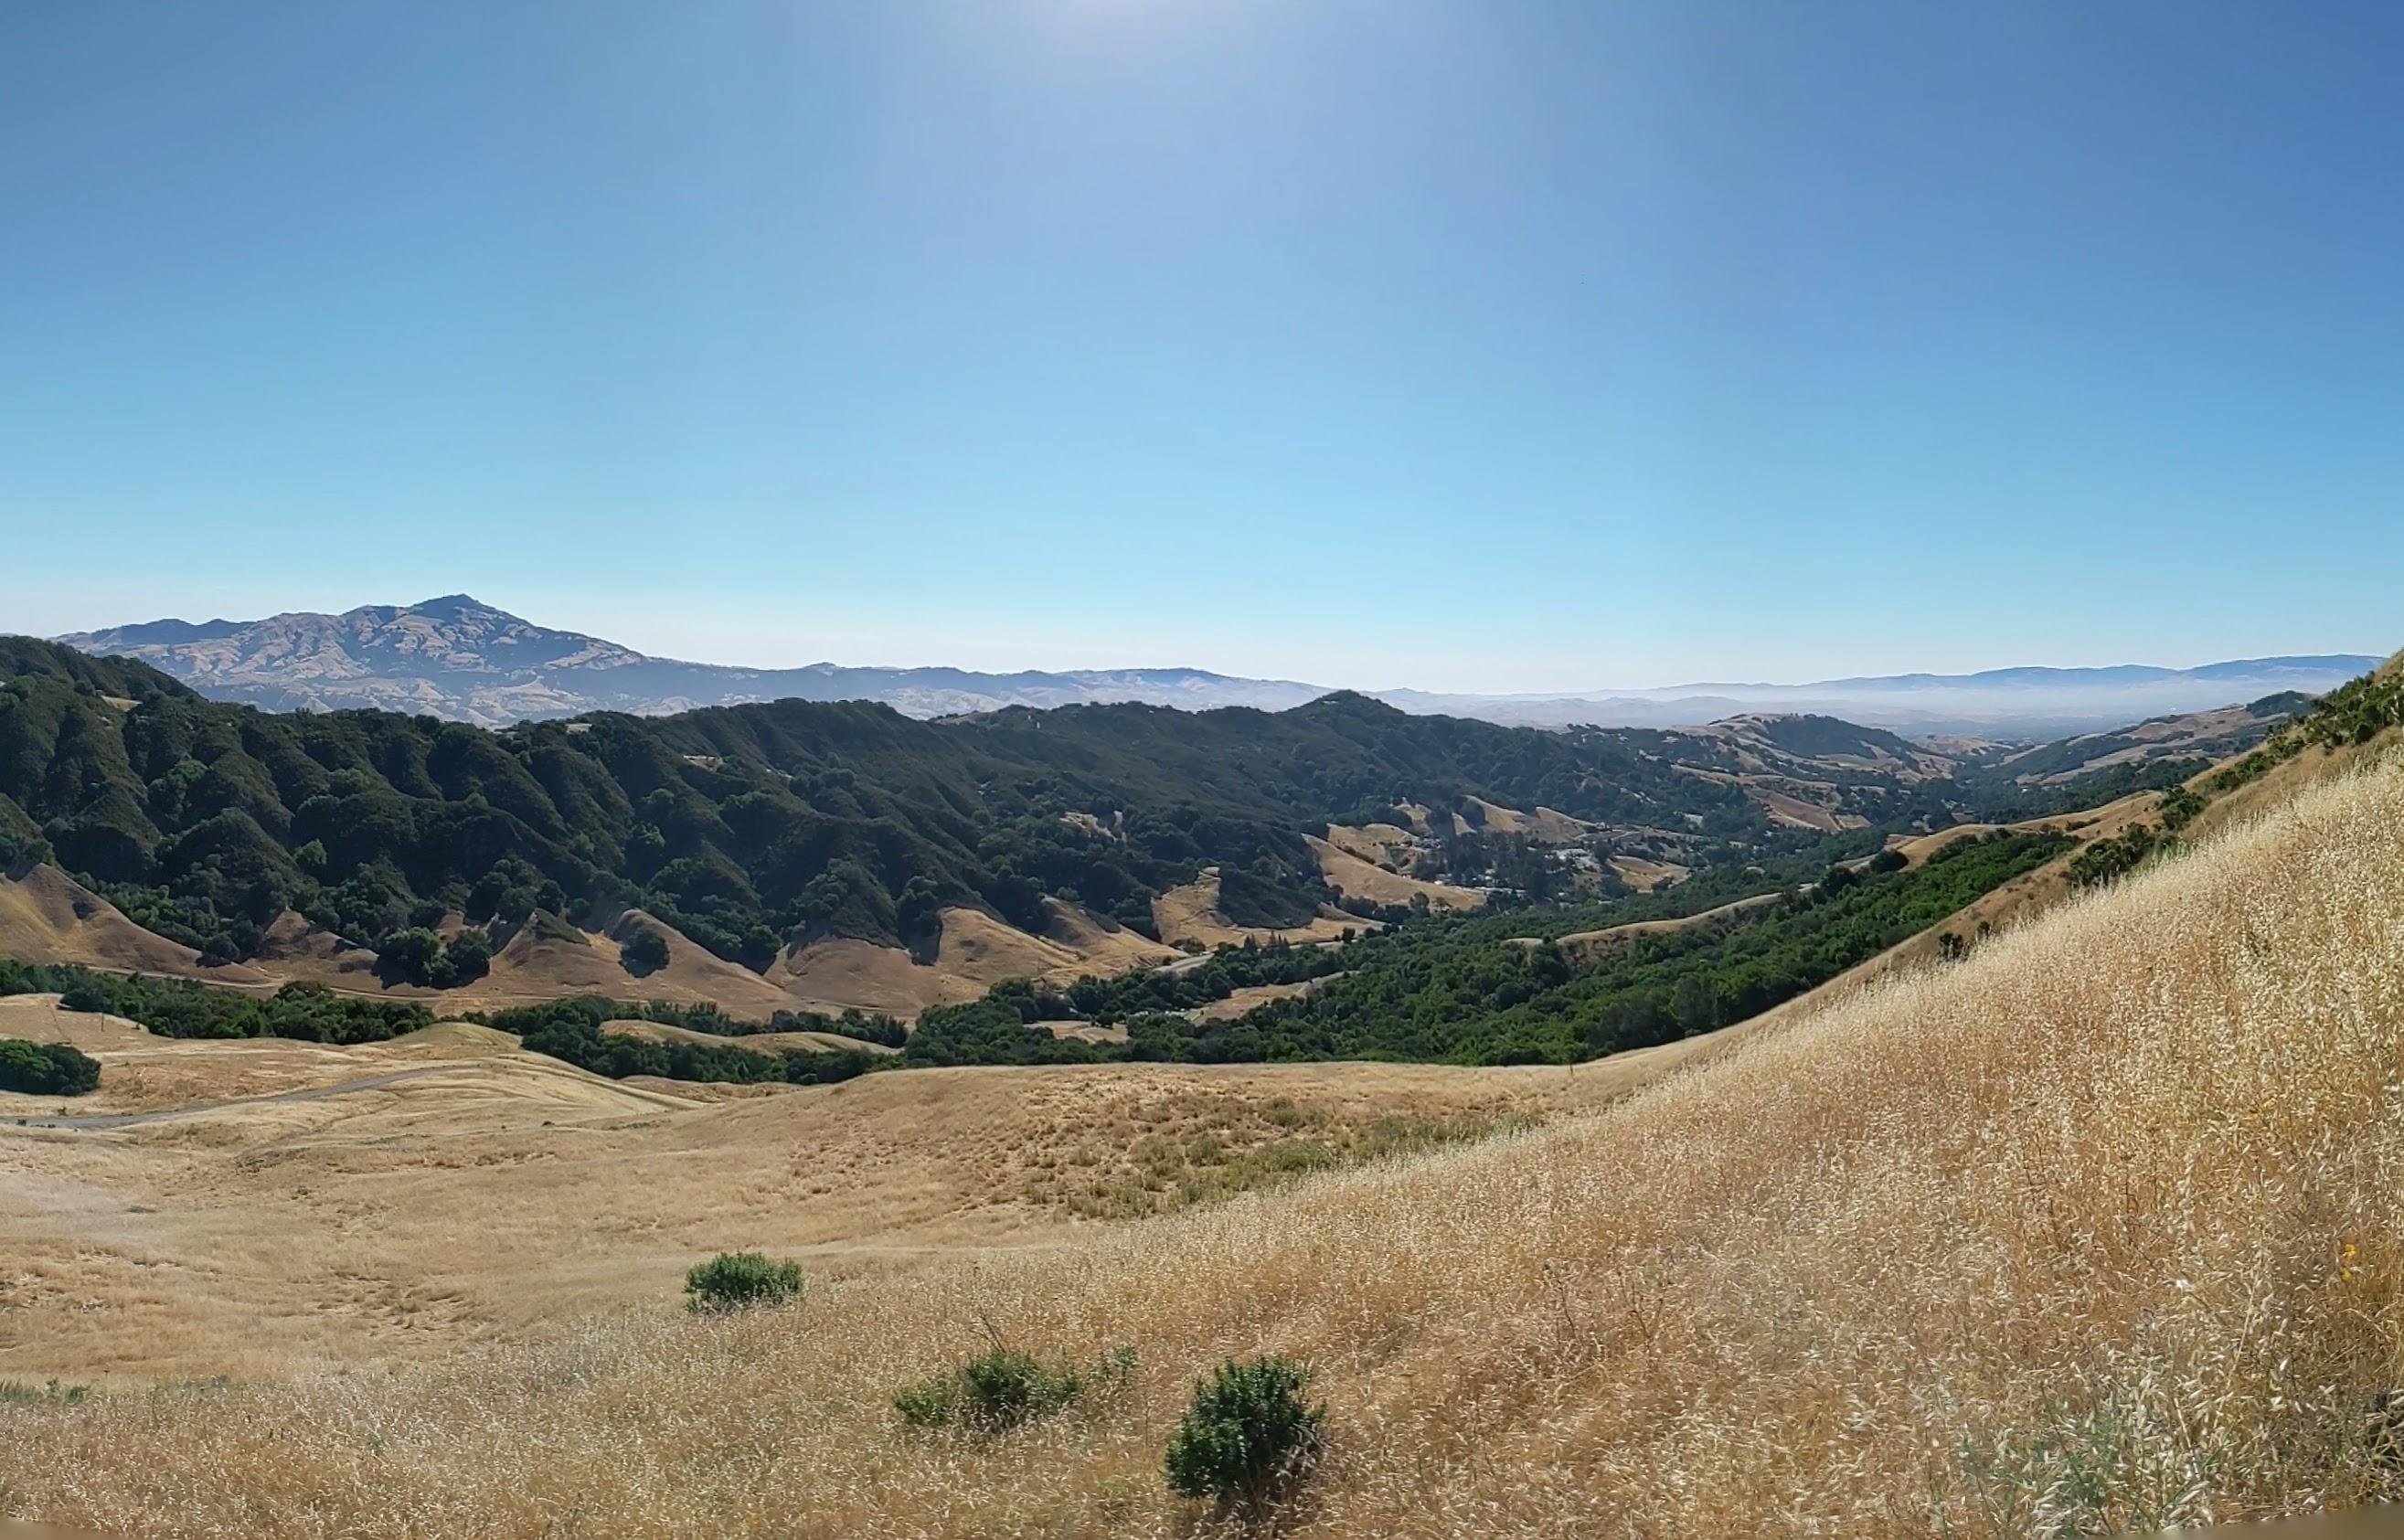 Mt. Diablo and Bollinger canyon - note gorges that were used to entrap the game